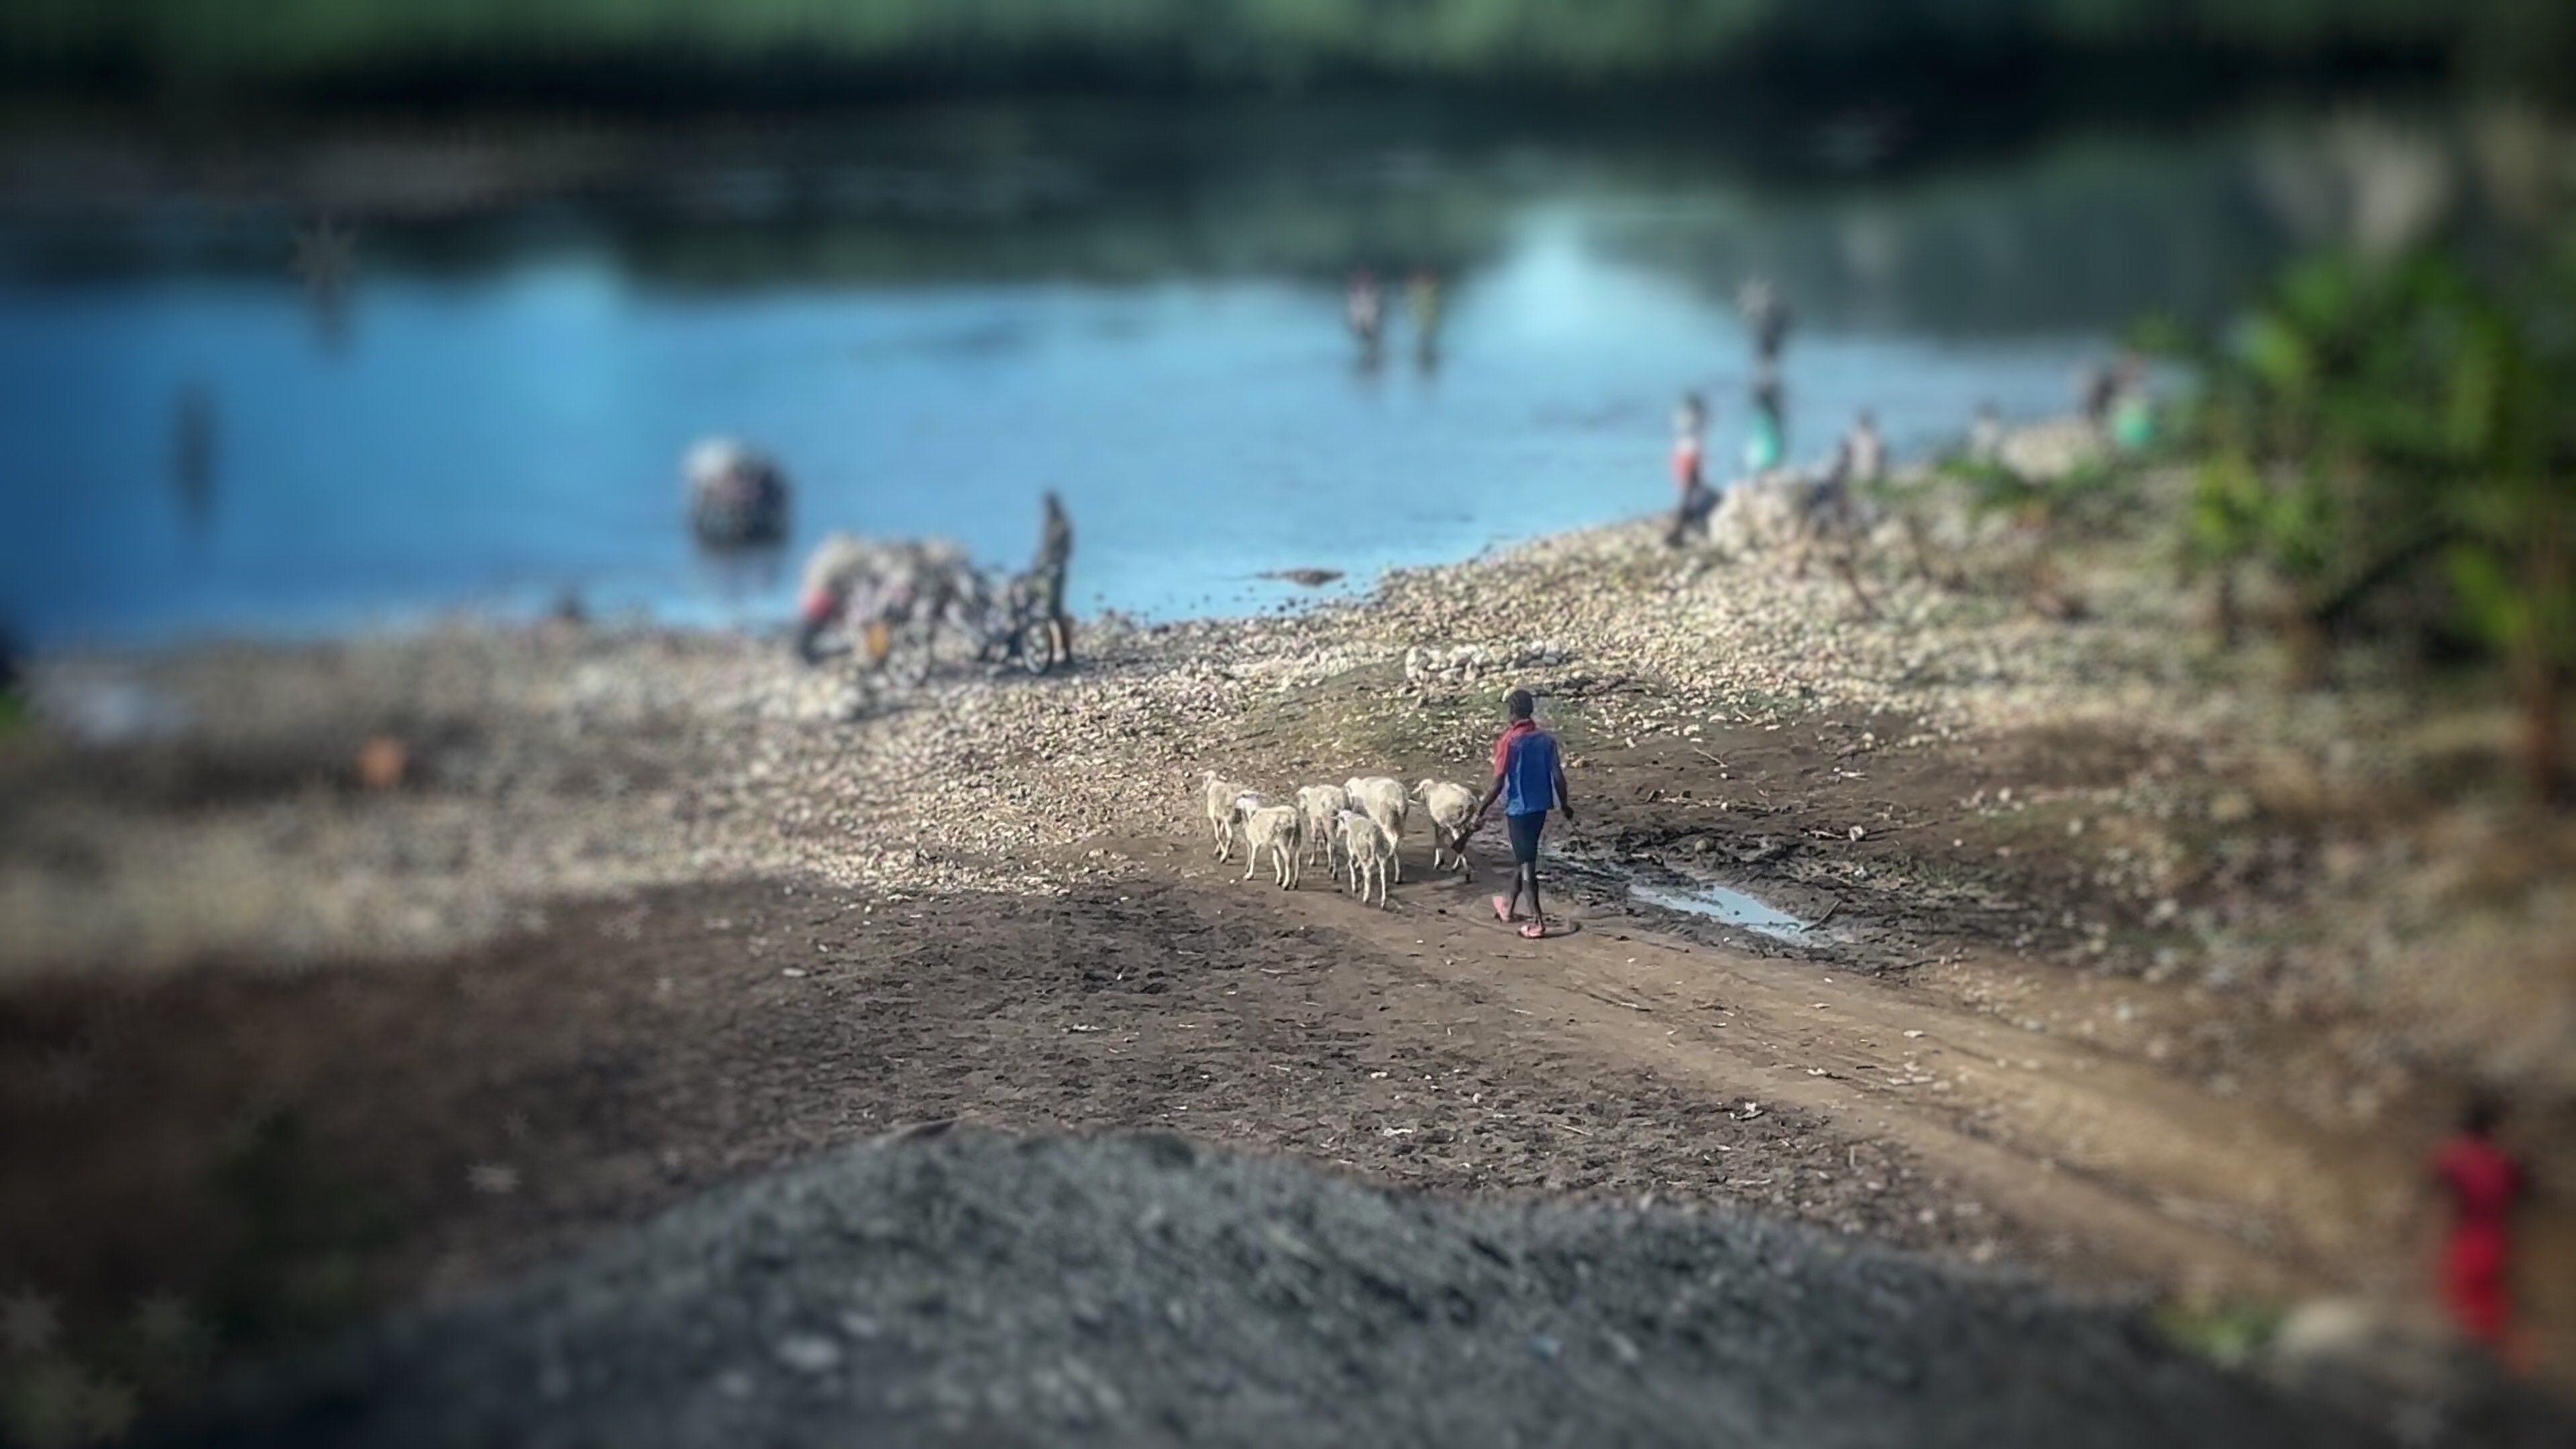 A Haitian shepherd leading his flock to cross a river.